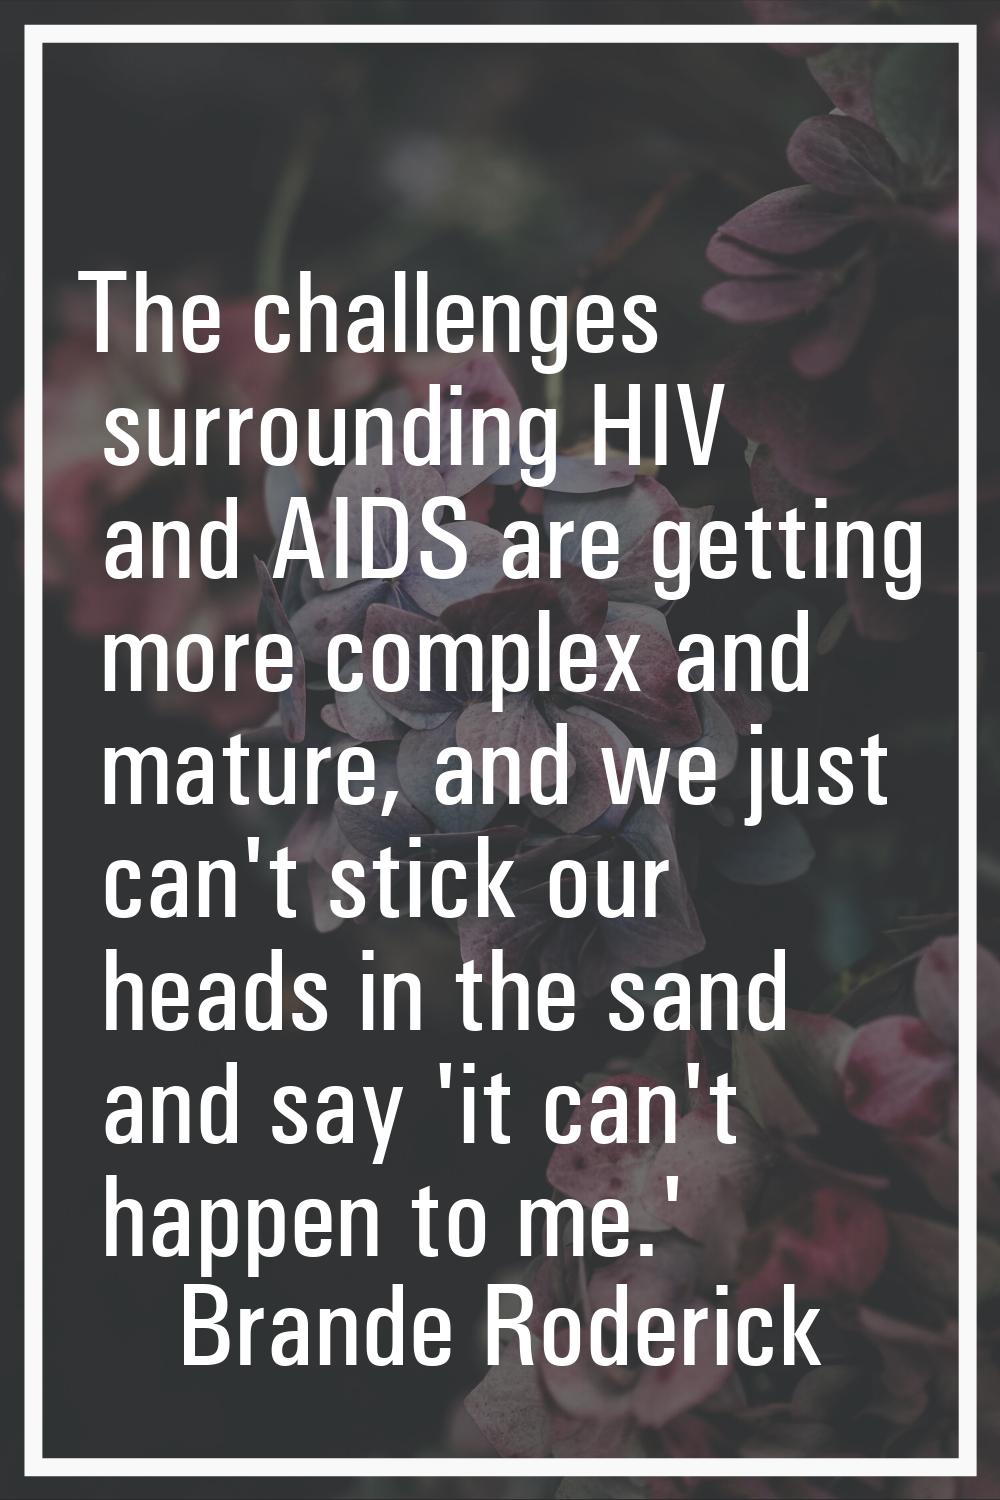 The challenges surrounding HIV and AIDS are getting more complex and mature, and we just can't stic